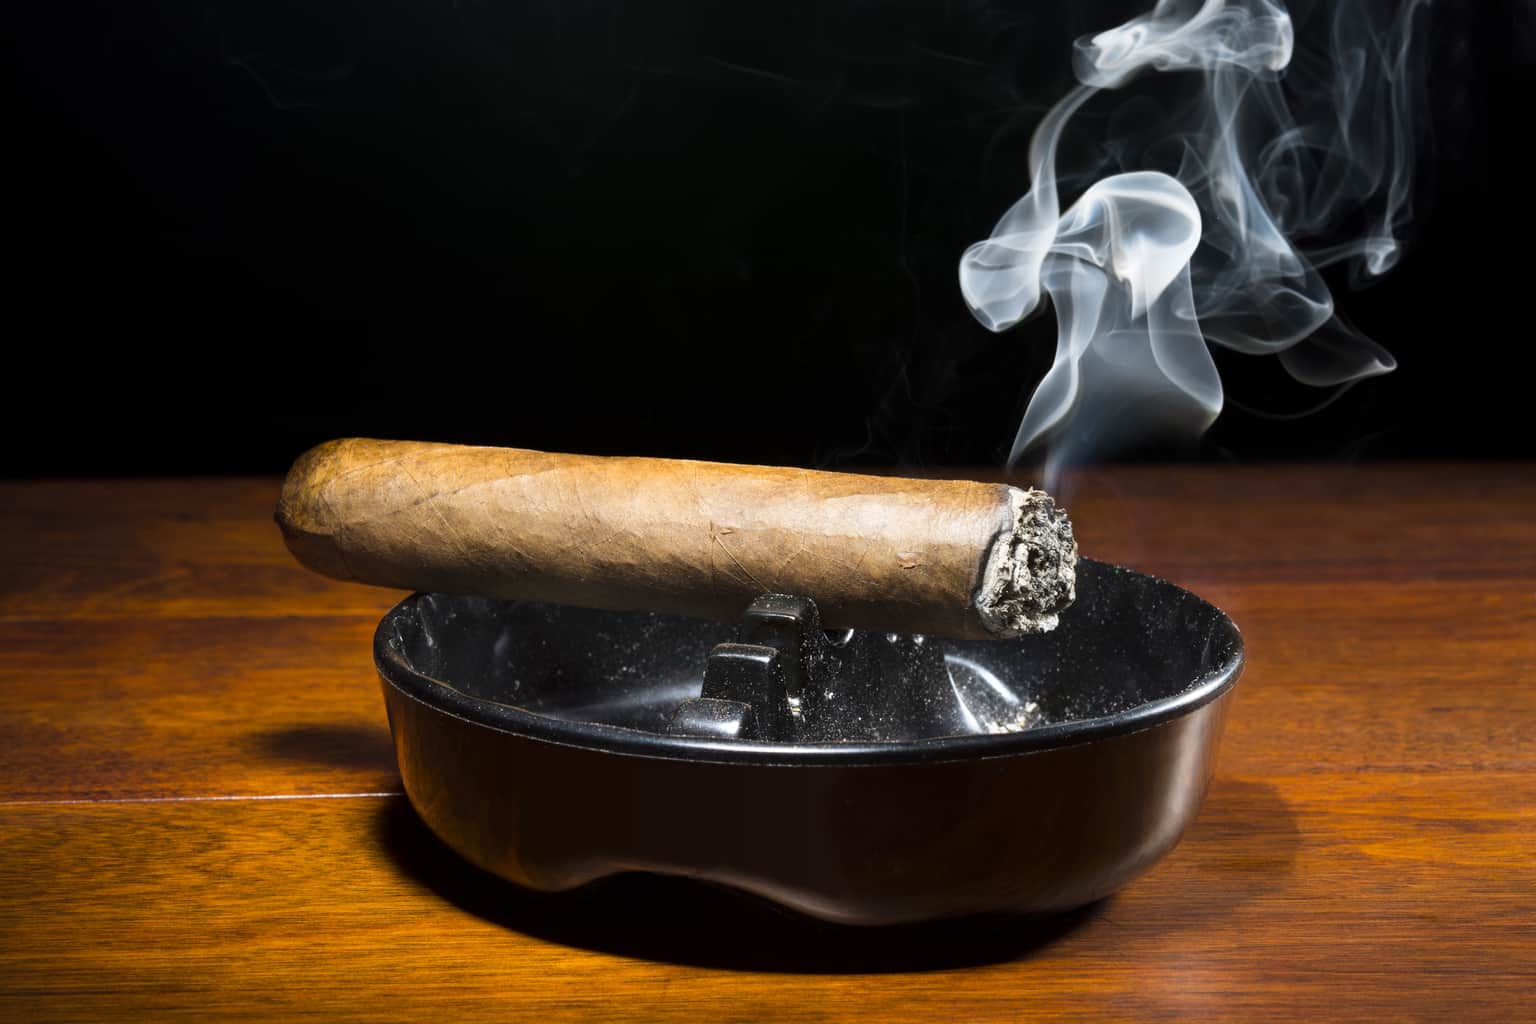 As a health researcher, here’s why I smoke the occasional cigar